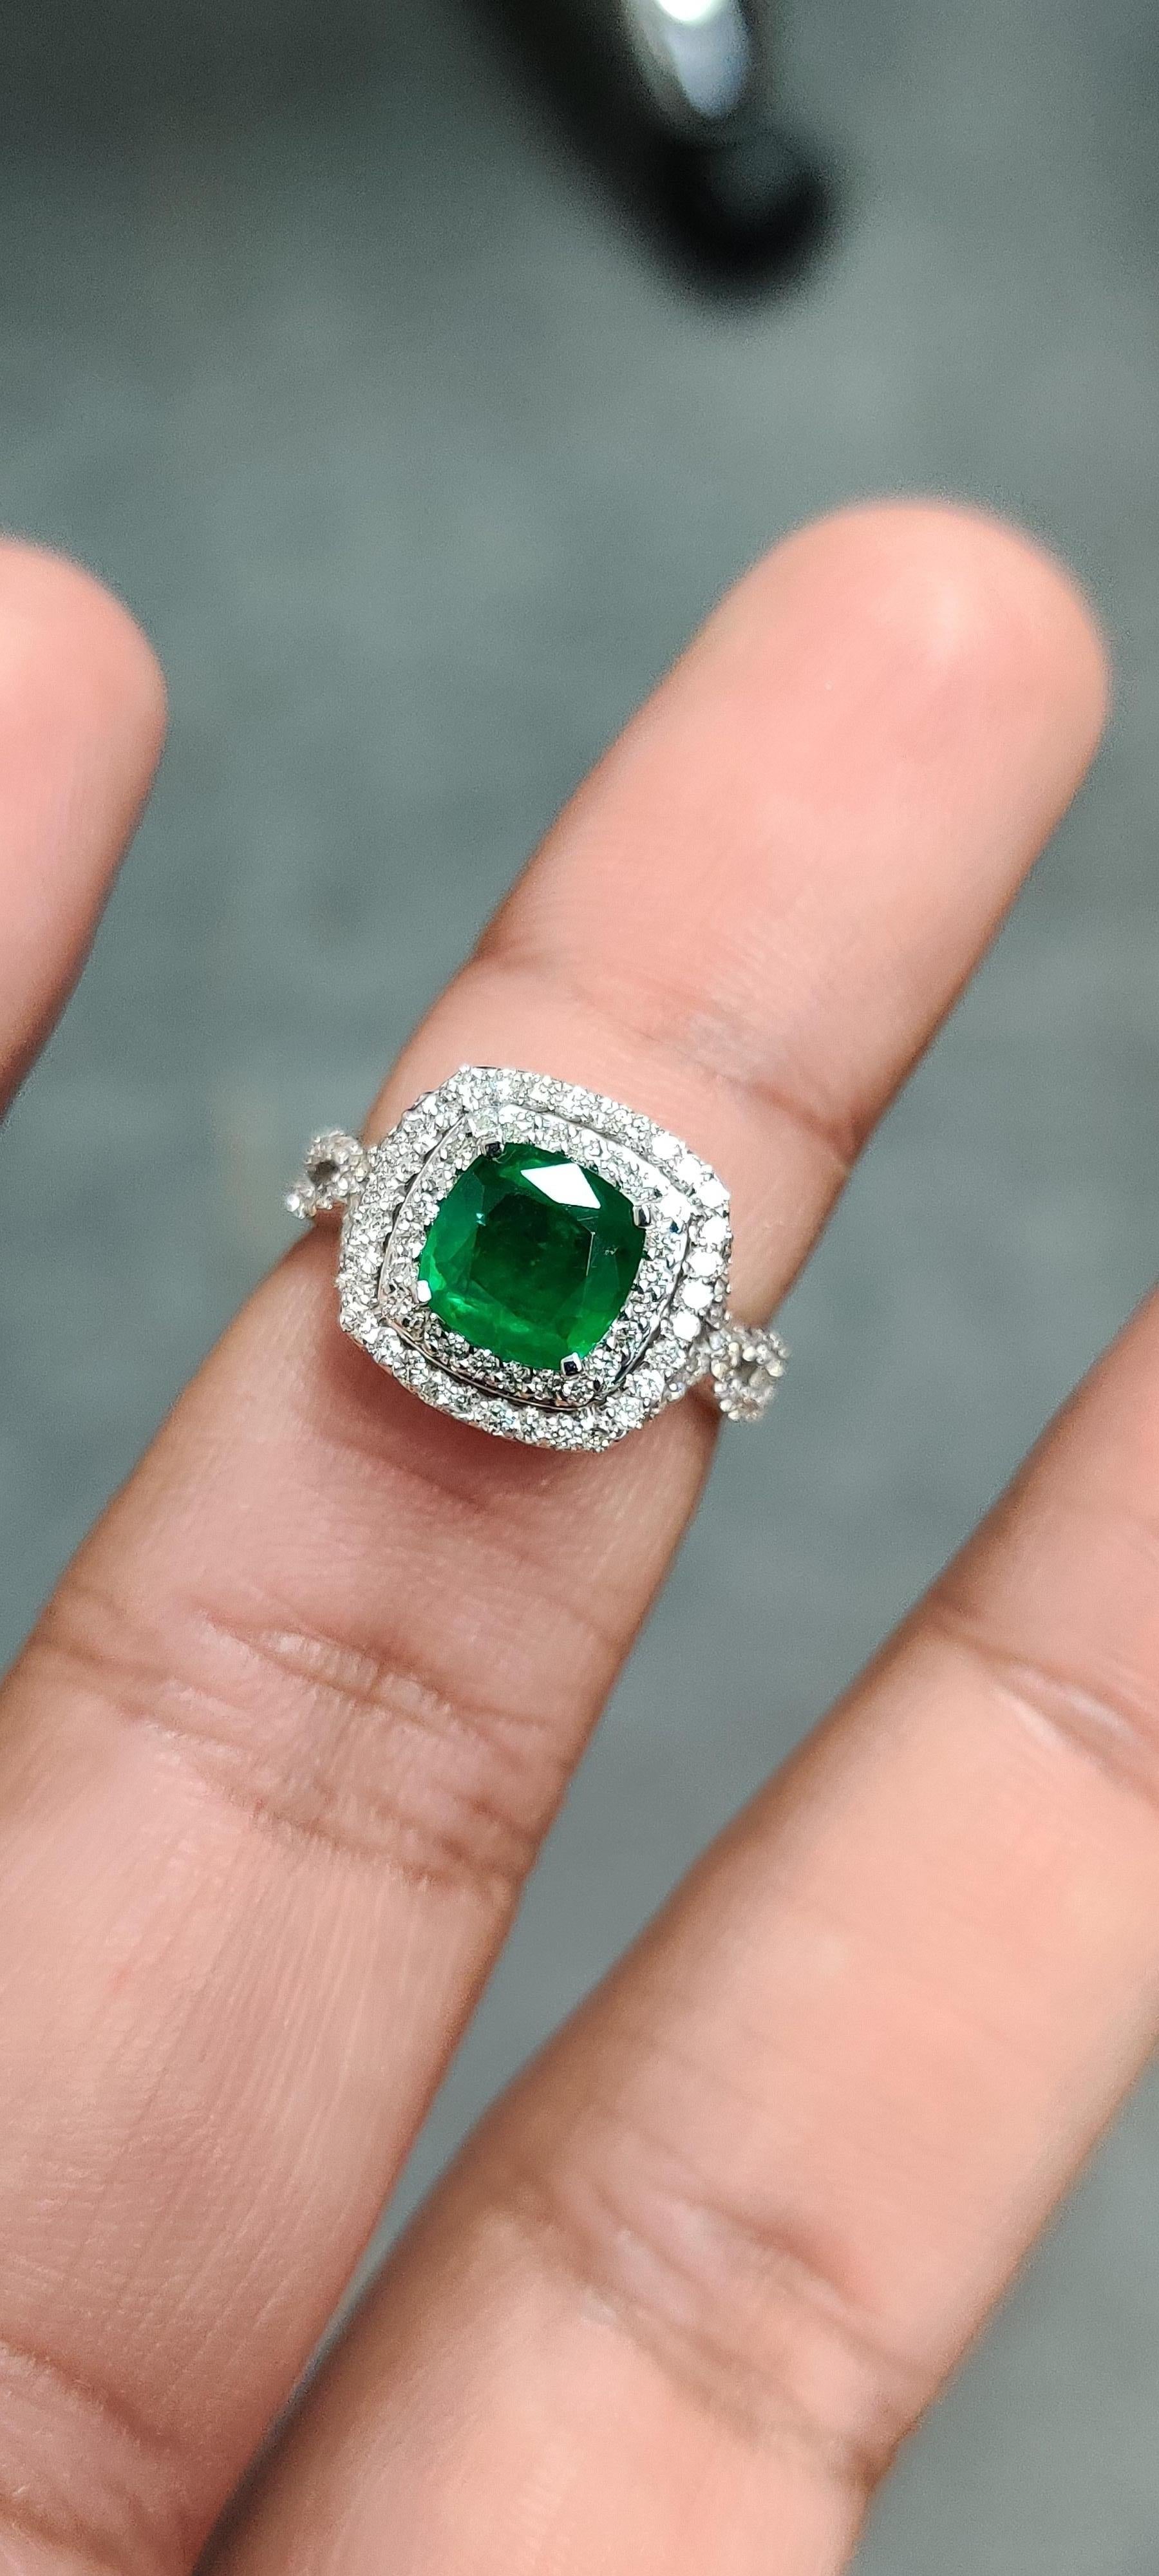 Art Deco 1.26 Carat Emerald with Halo Diamonds 18K White Gold Ring For Sale